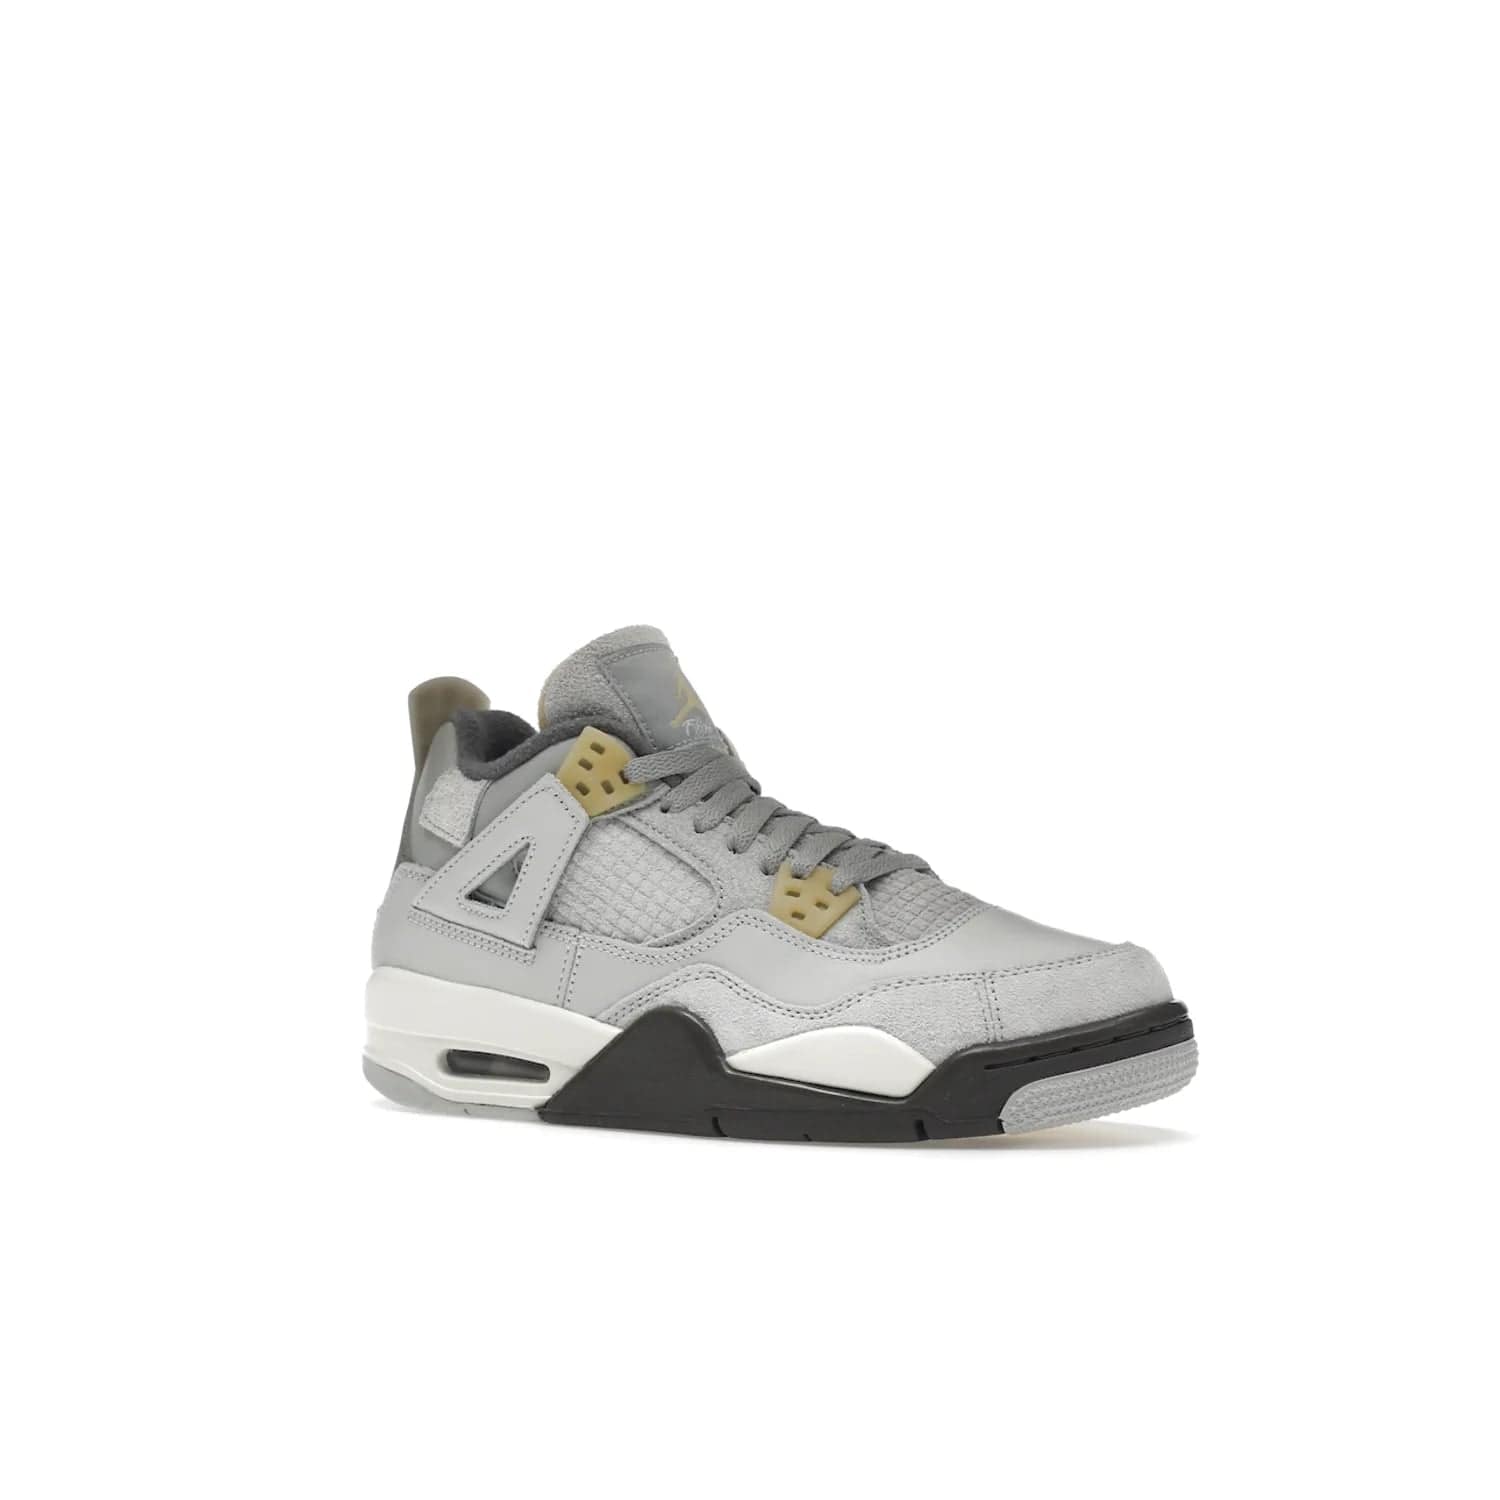 Jordan 4 Retro SE Craft Photon Dust (GS) - Image 4 - Only at www.BallersClubKickz.com - Shop the Jordan 4 Retro SE Craft Photon Dust (GS), the ultimate mix of style and comfort. With photonic dust, pale vanilla, off-white, grey fog, flat pewter and sail colorway, foam midsole, and rubber outsole, don't miss this special edition Jordan 4 releasing Feb 11, 2023.